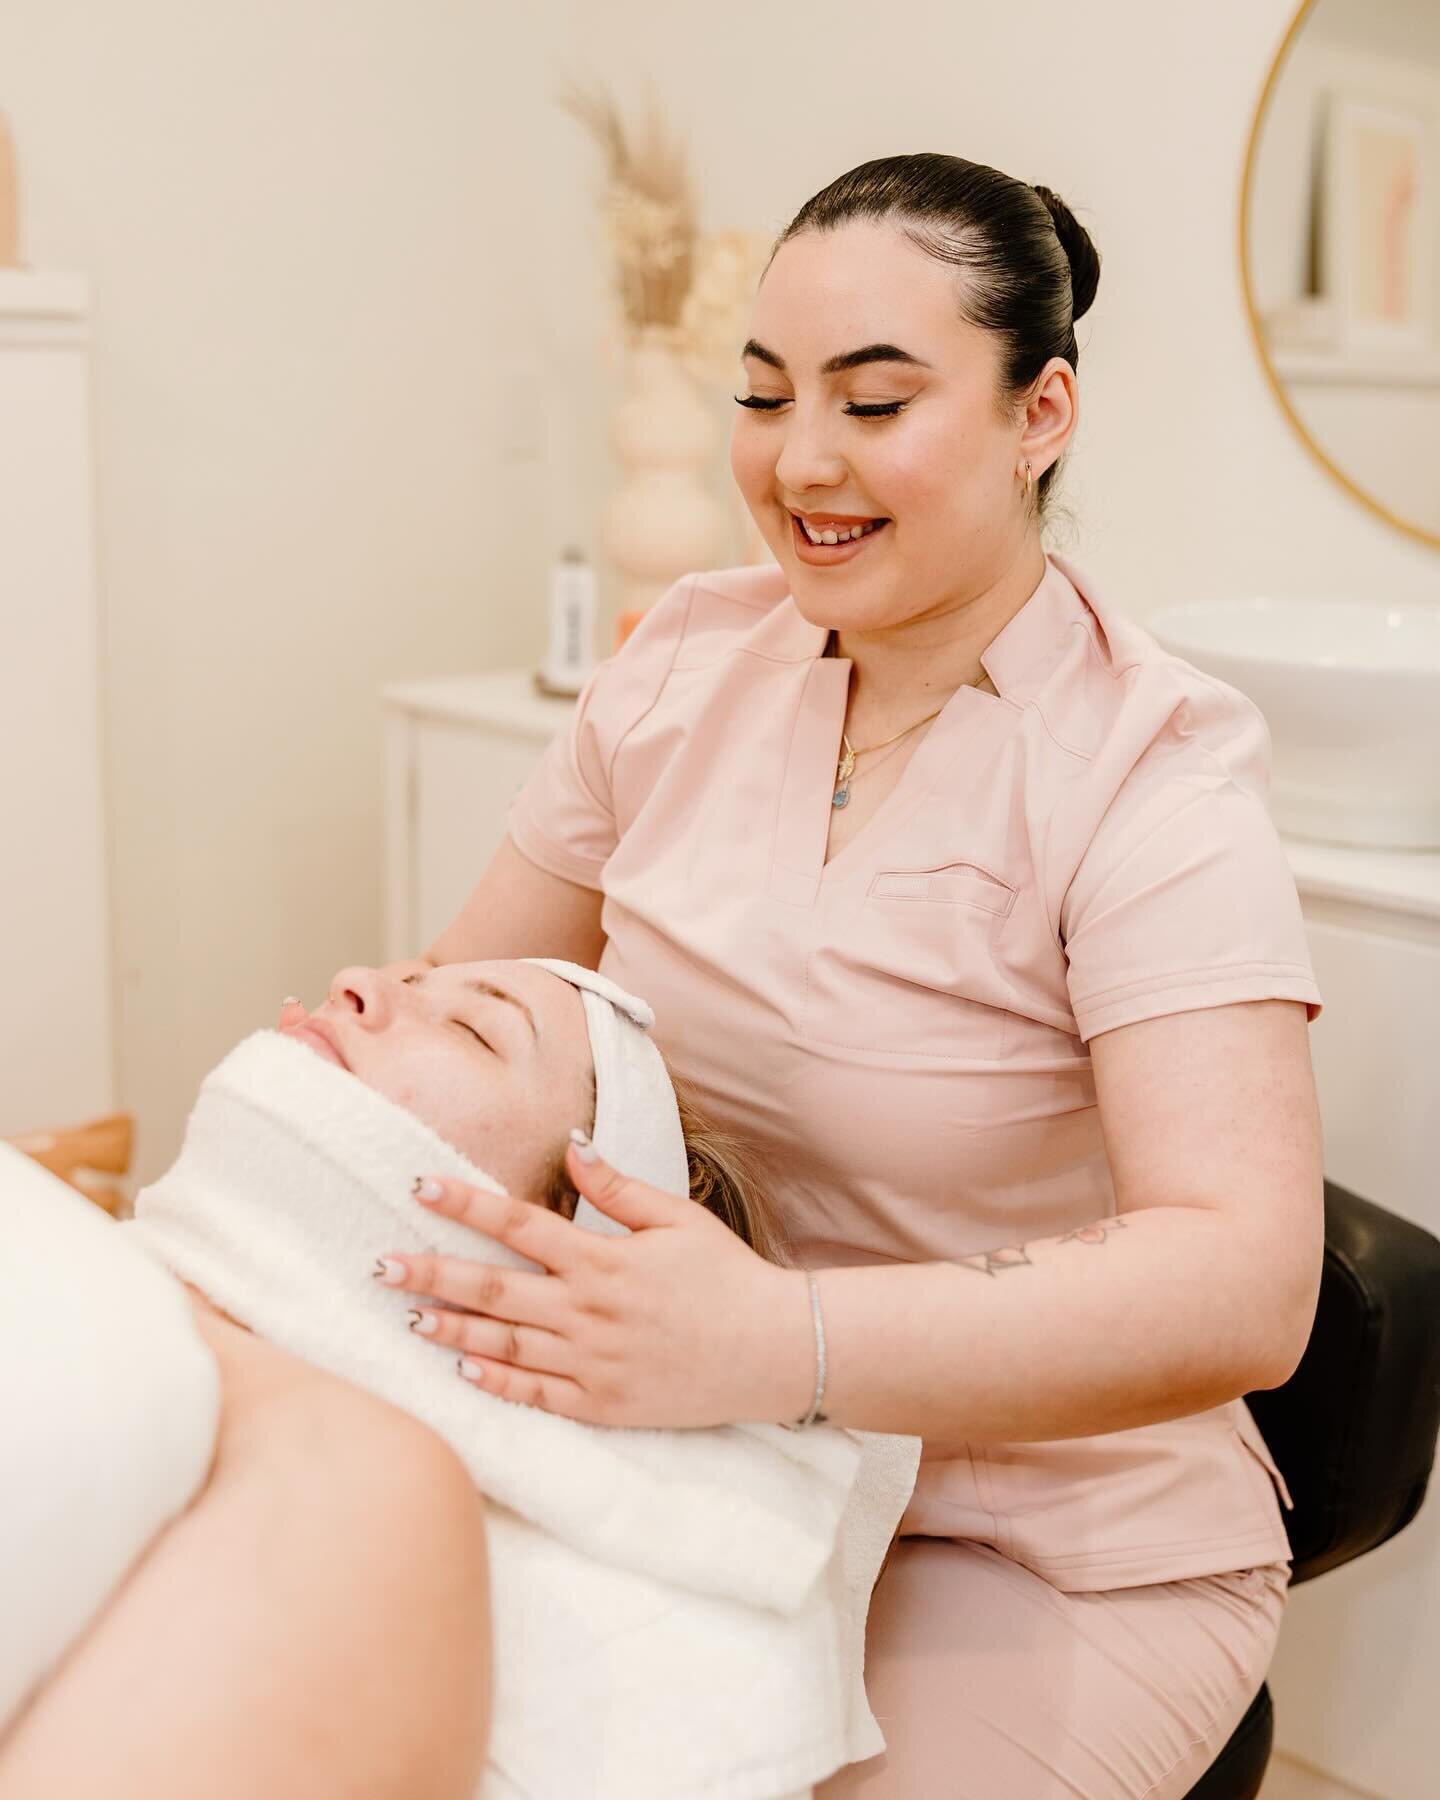 ✨4 TIPS TO HELP YOU GET THE MOST OUT OF YOUR FACIAL TREATMENT✨✨

1. Reschedule your workout 🏋️ increased heat in the skin and sweat during a workout can irritate your newly exfoliated skin. Resume after 24 hours.

2. Skip out on makeup for 24 hours?